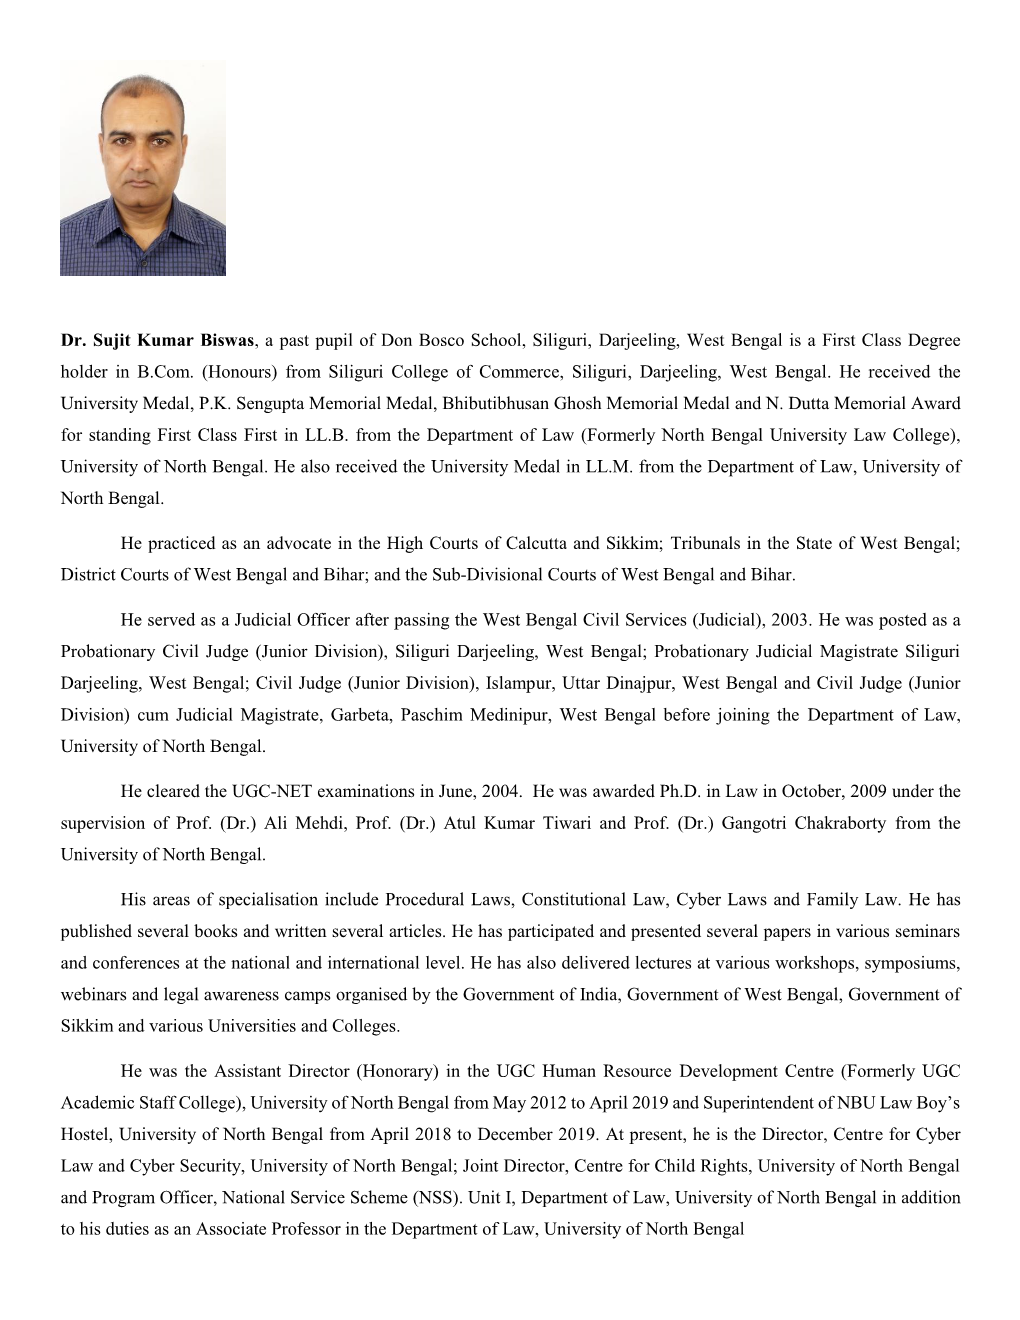 Dr. Sujit Kumar Biswas, a Past Pupil of Don Bosco School, Siliguri, Darjeeling, West Bengal Is a First Class Degree Holder in B.Com